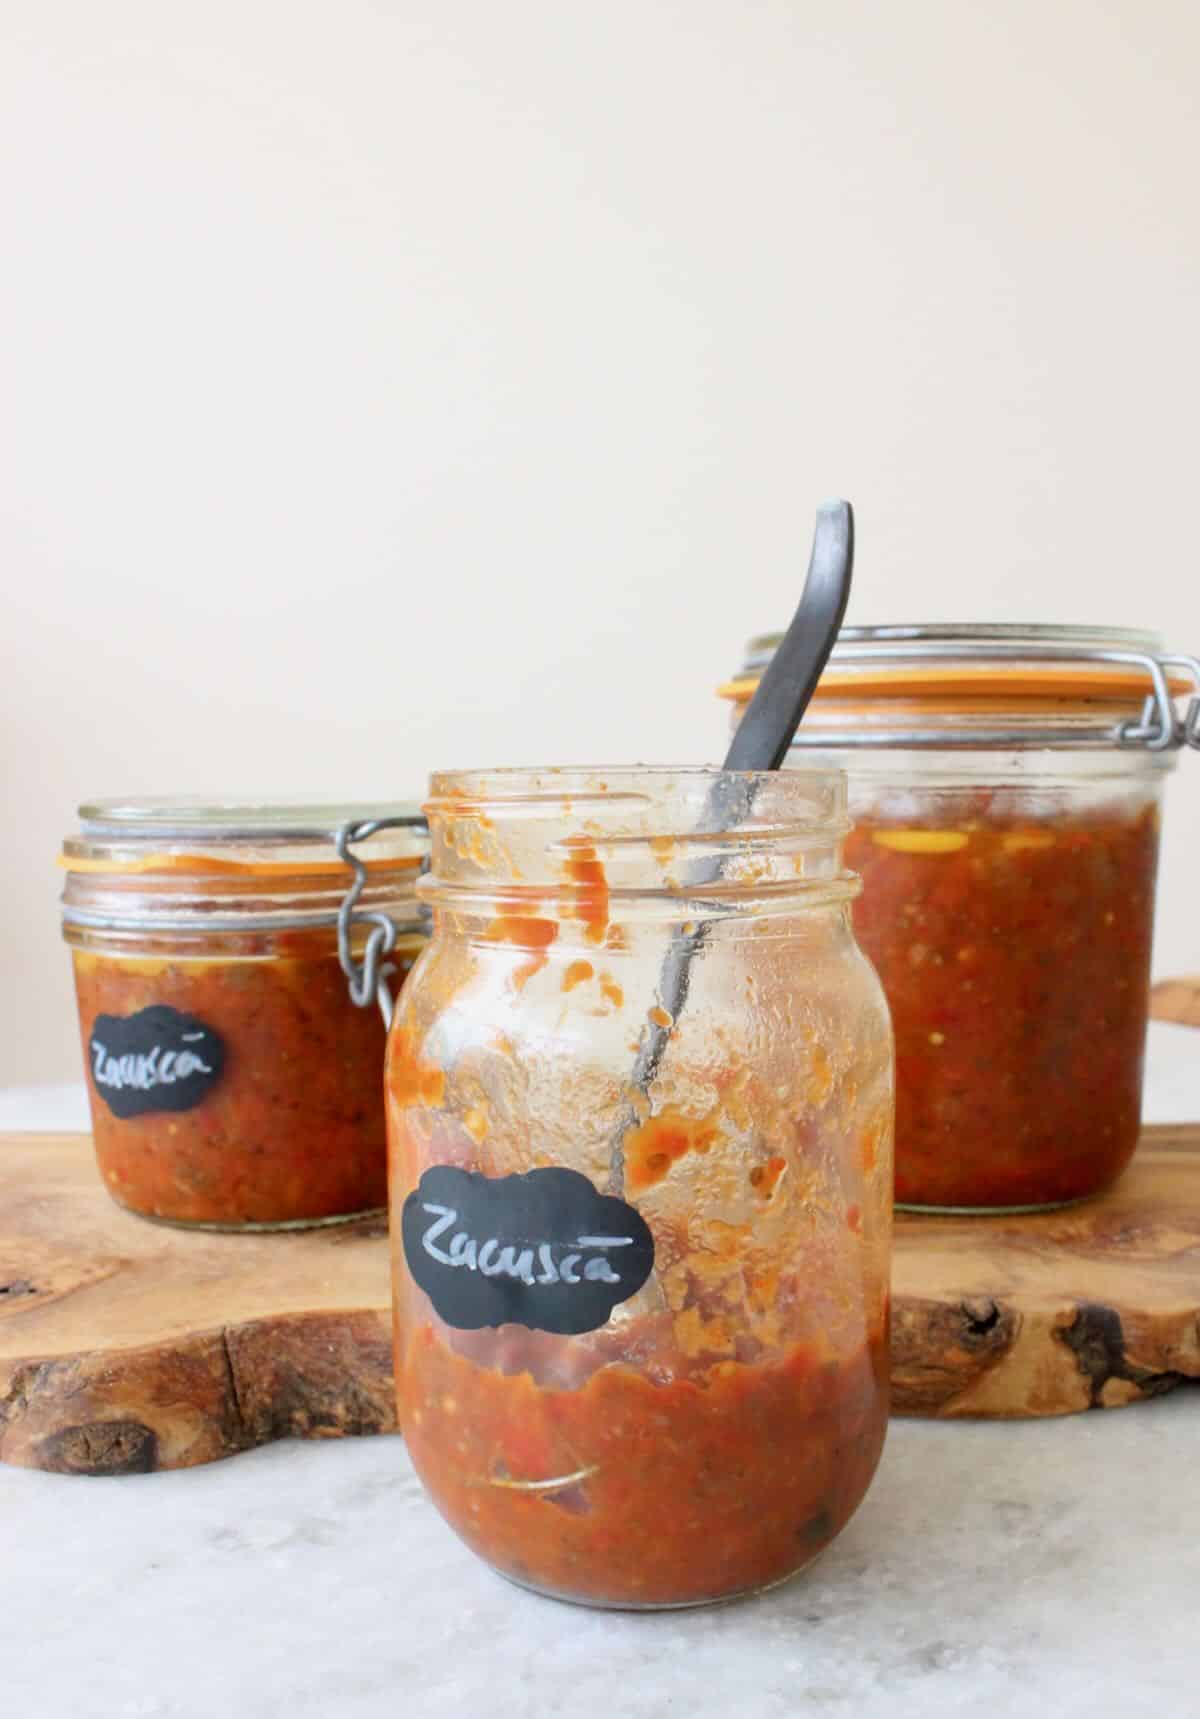 Roasted pepper and eggplant spread in Jars